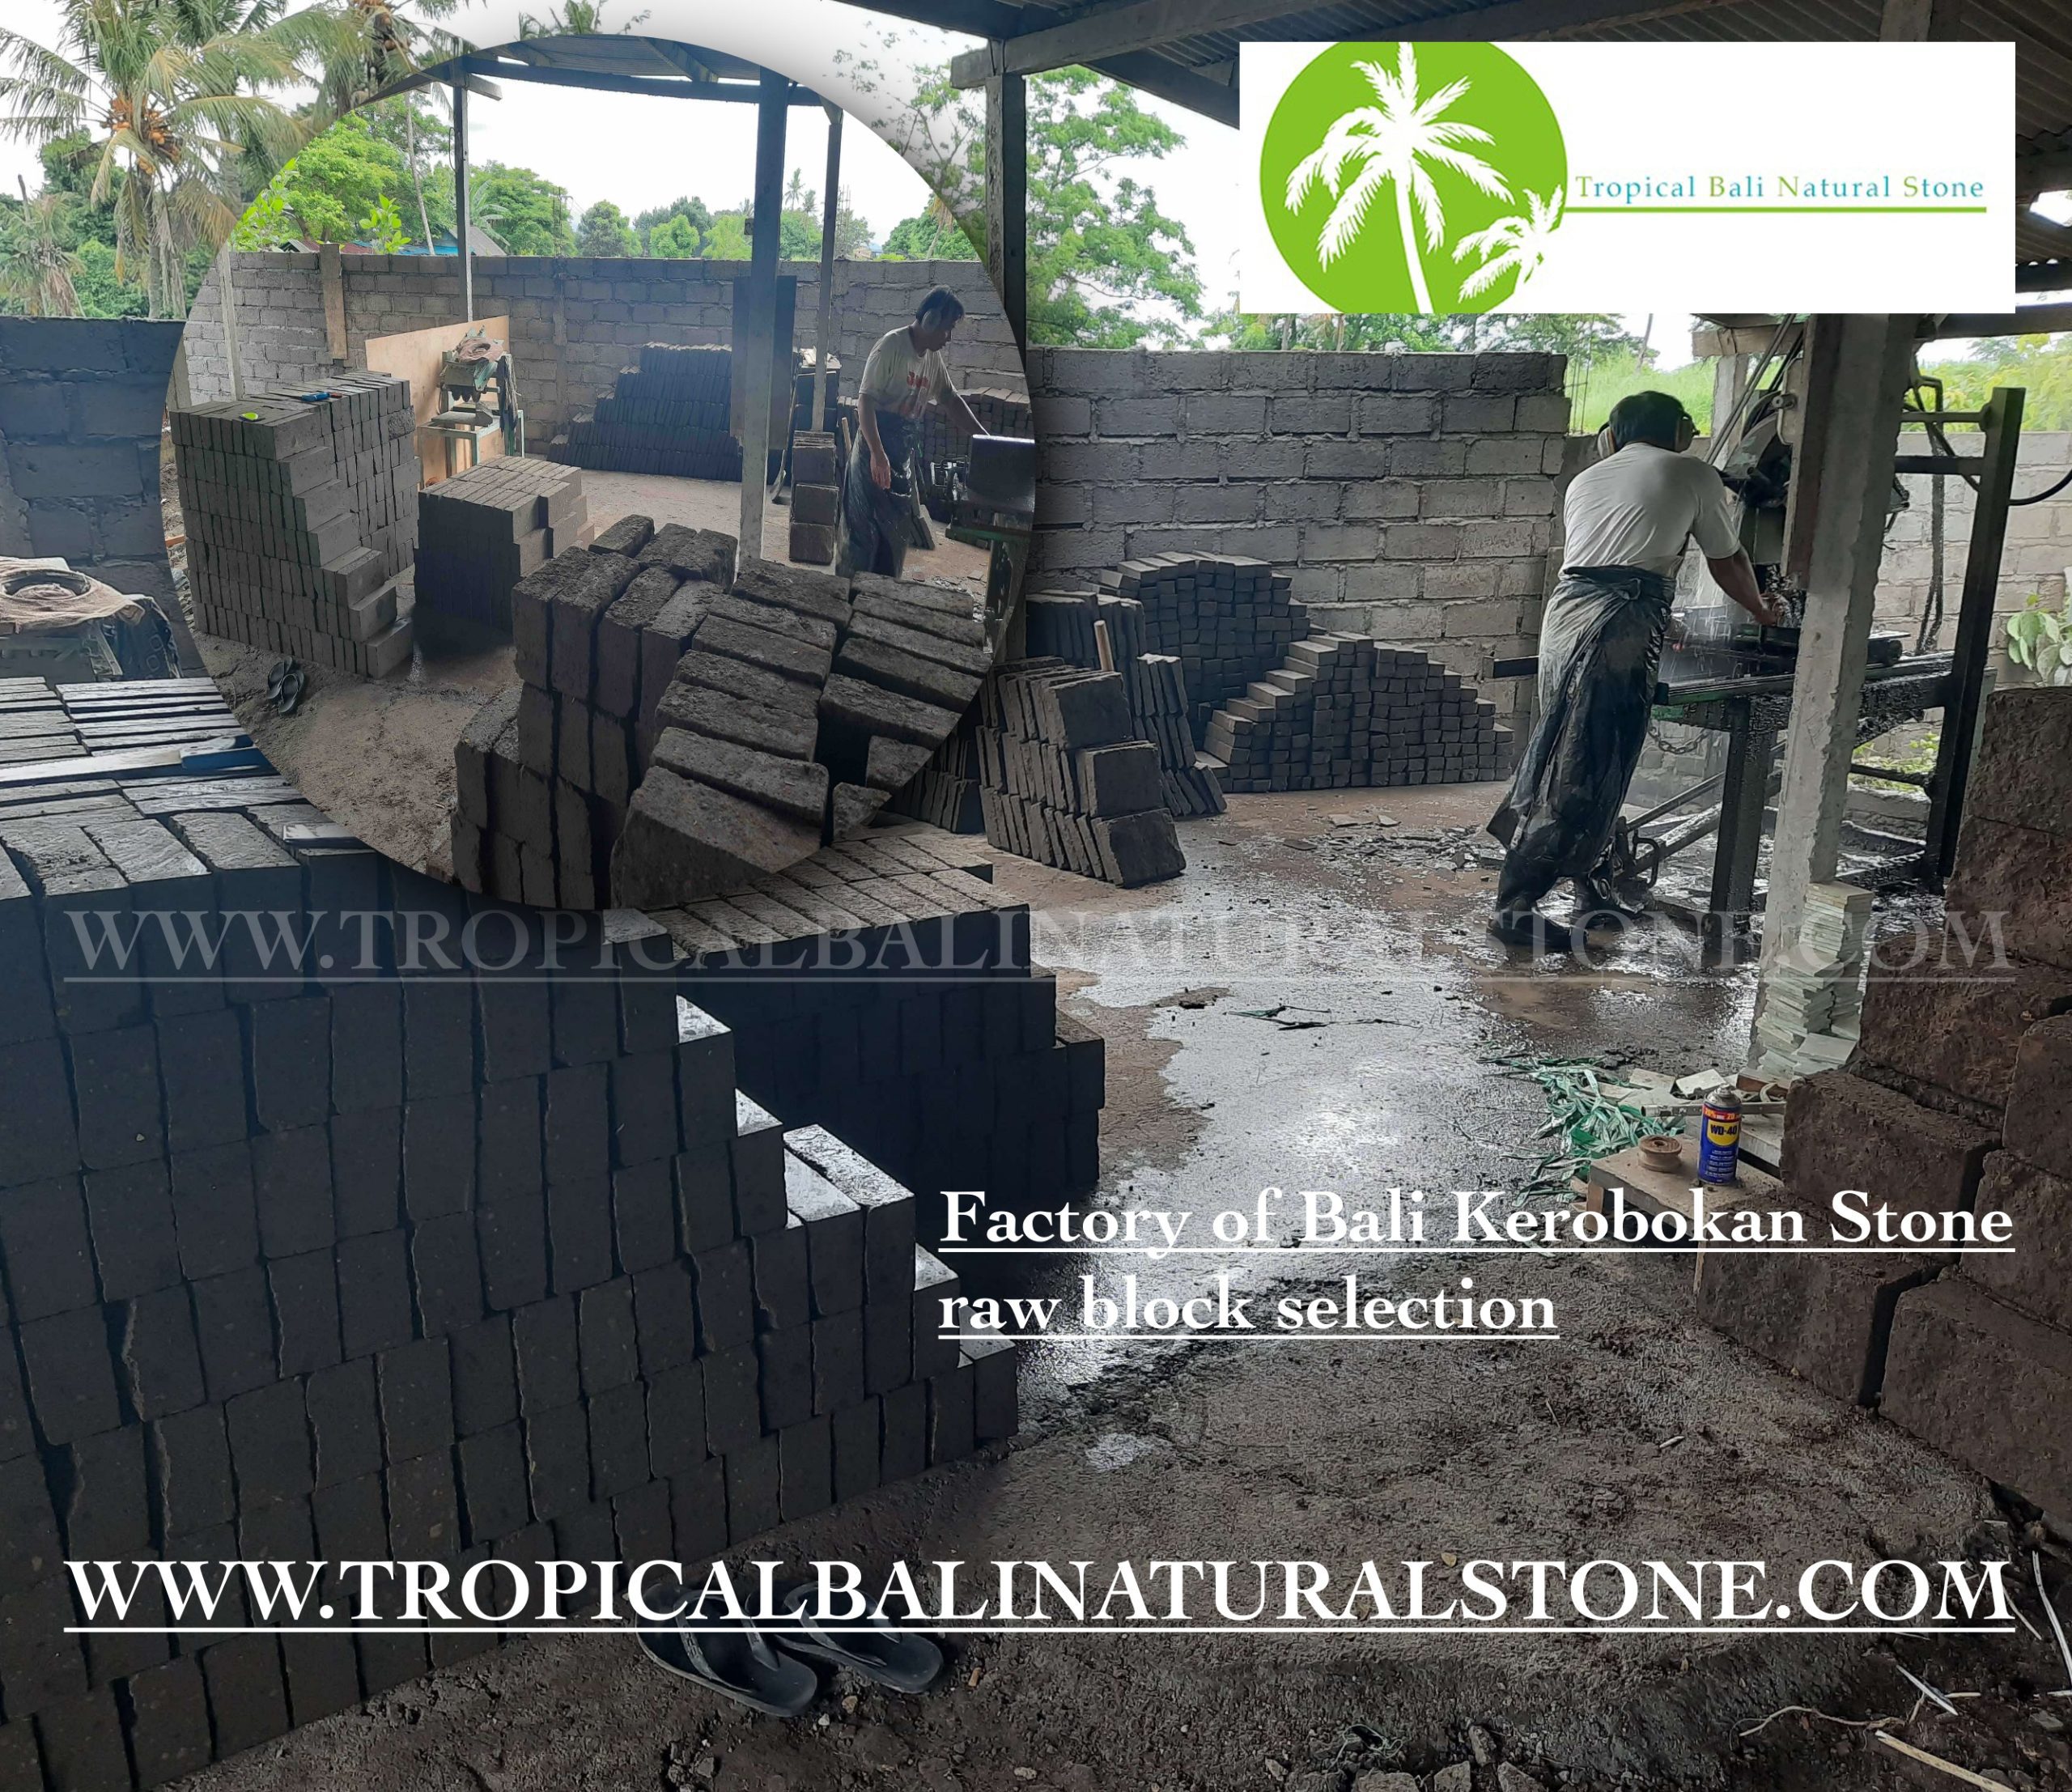 Production line showcasing the crafting process of Bali Kerobokan stone products.